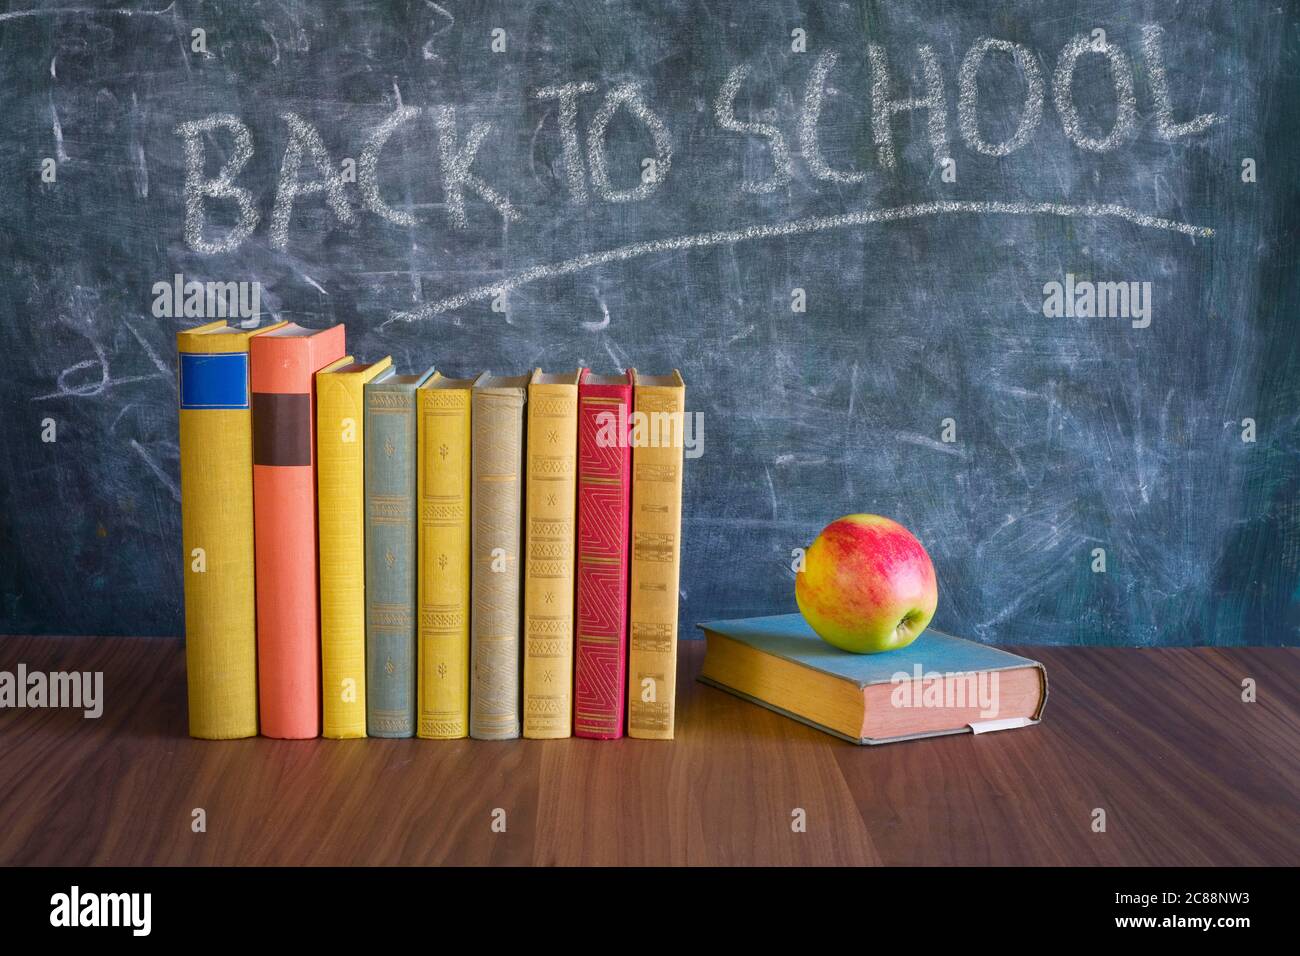 Back to school after the corona lockdown, reopening education systems, symbolic picture Stock Photo